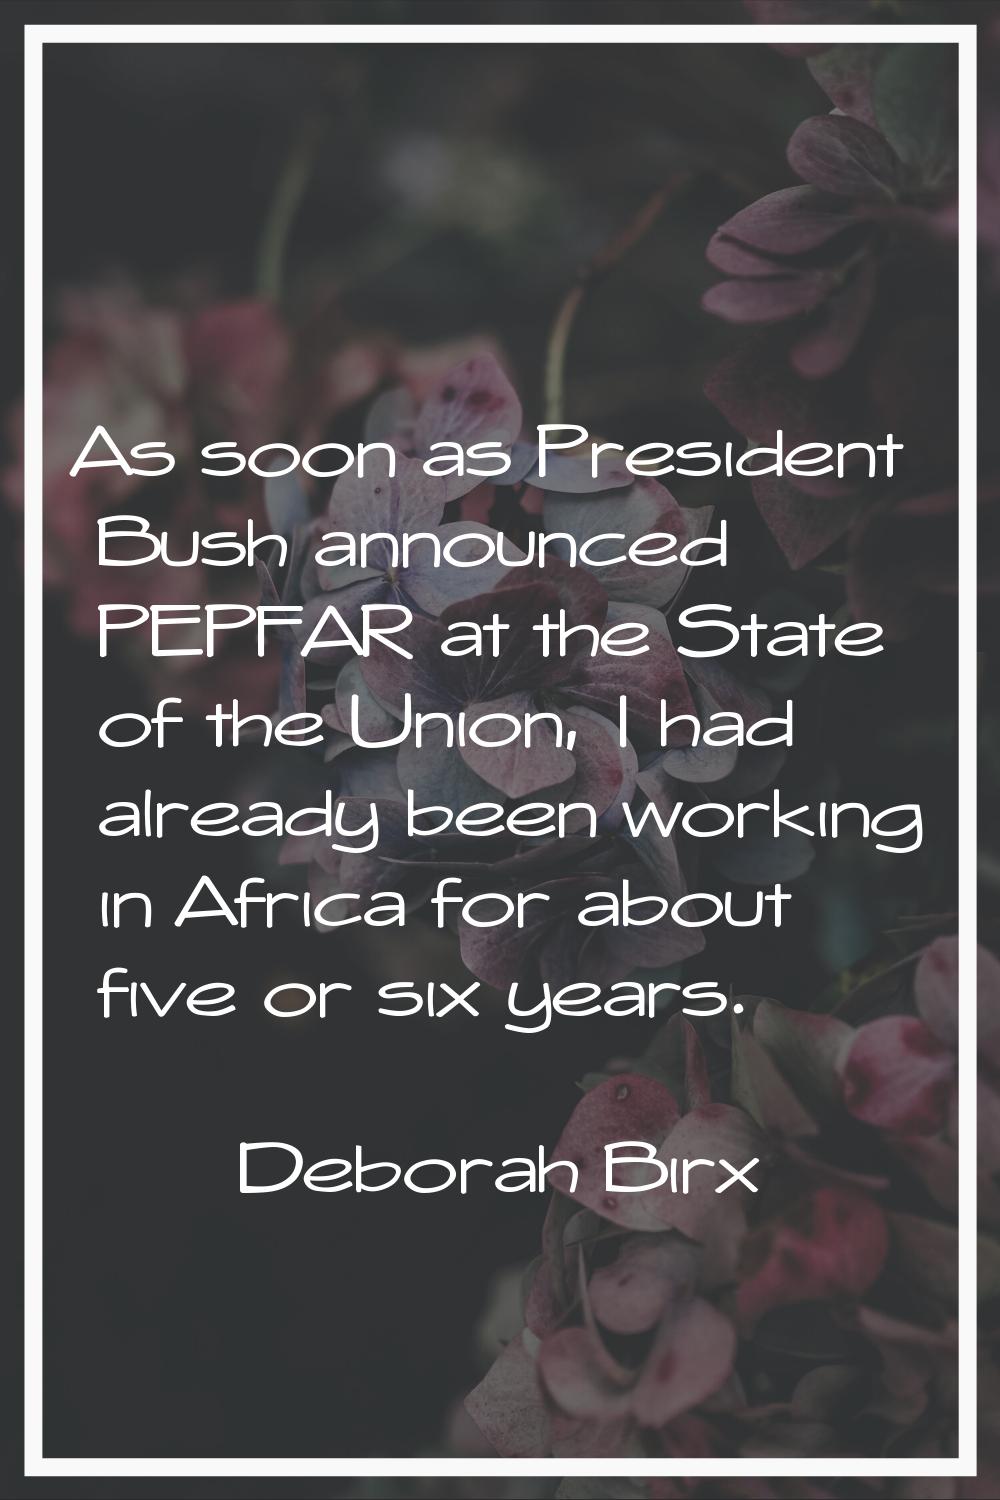 As soon as President Bush announced PEPFAR at the State of the Union, I had already been working in